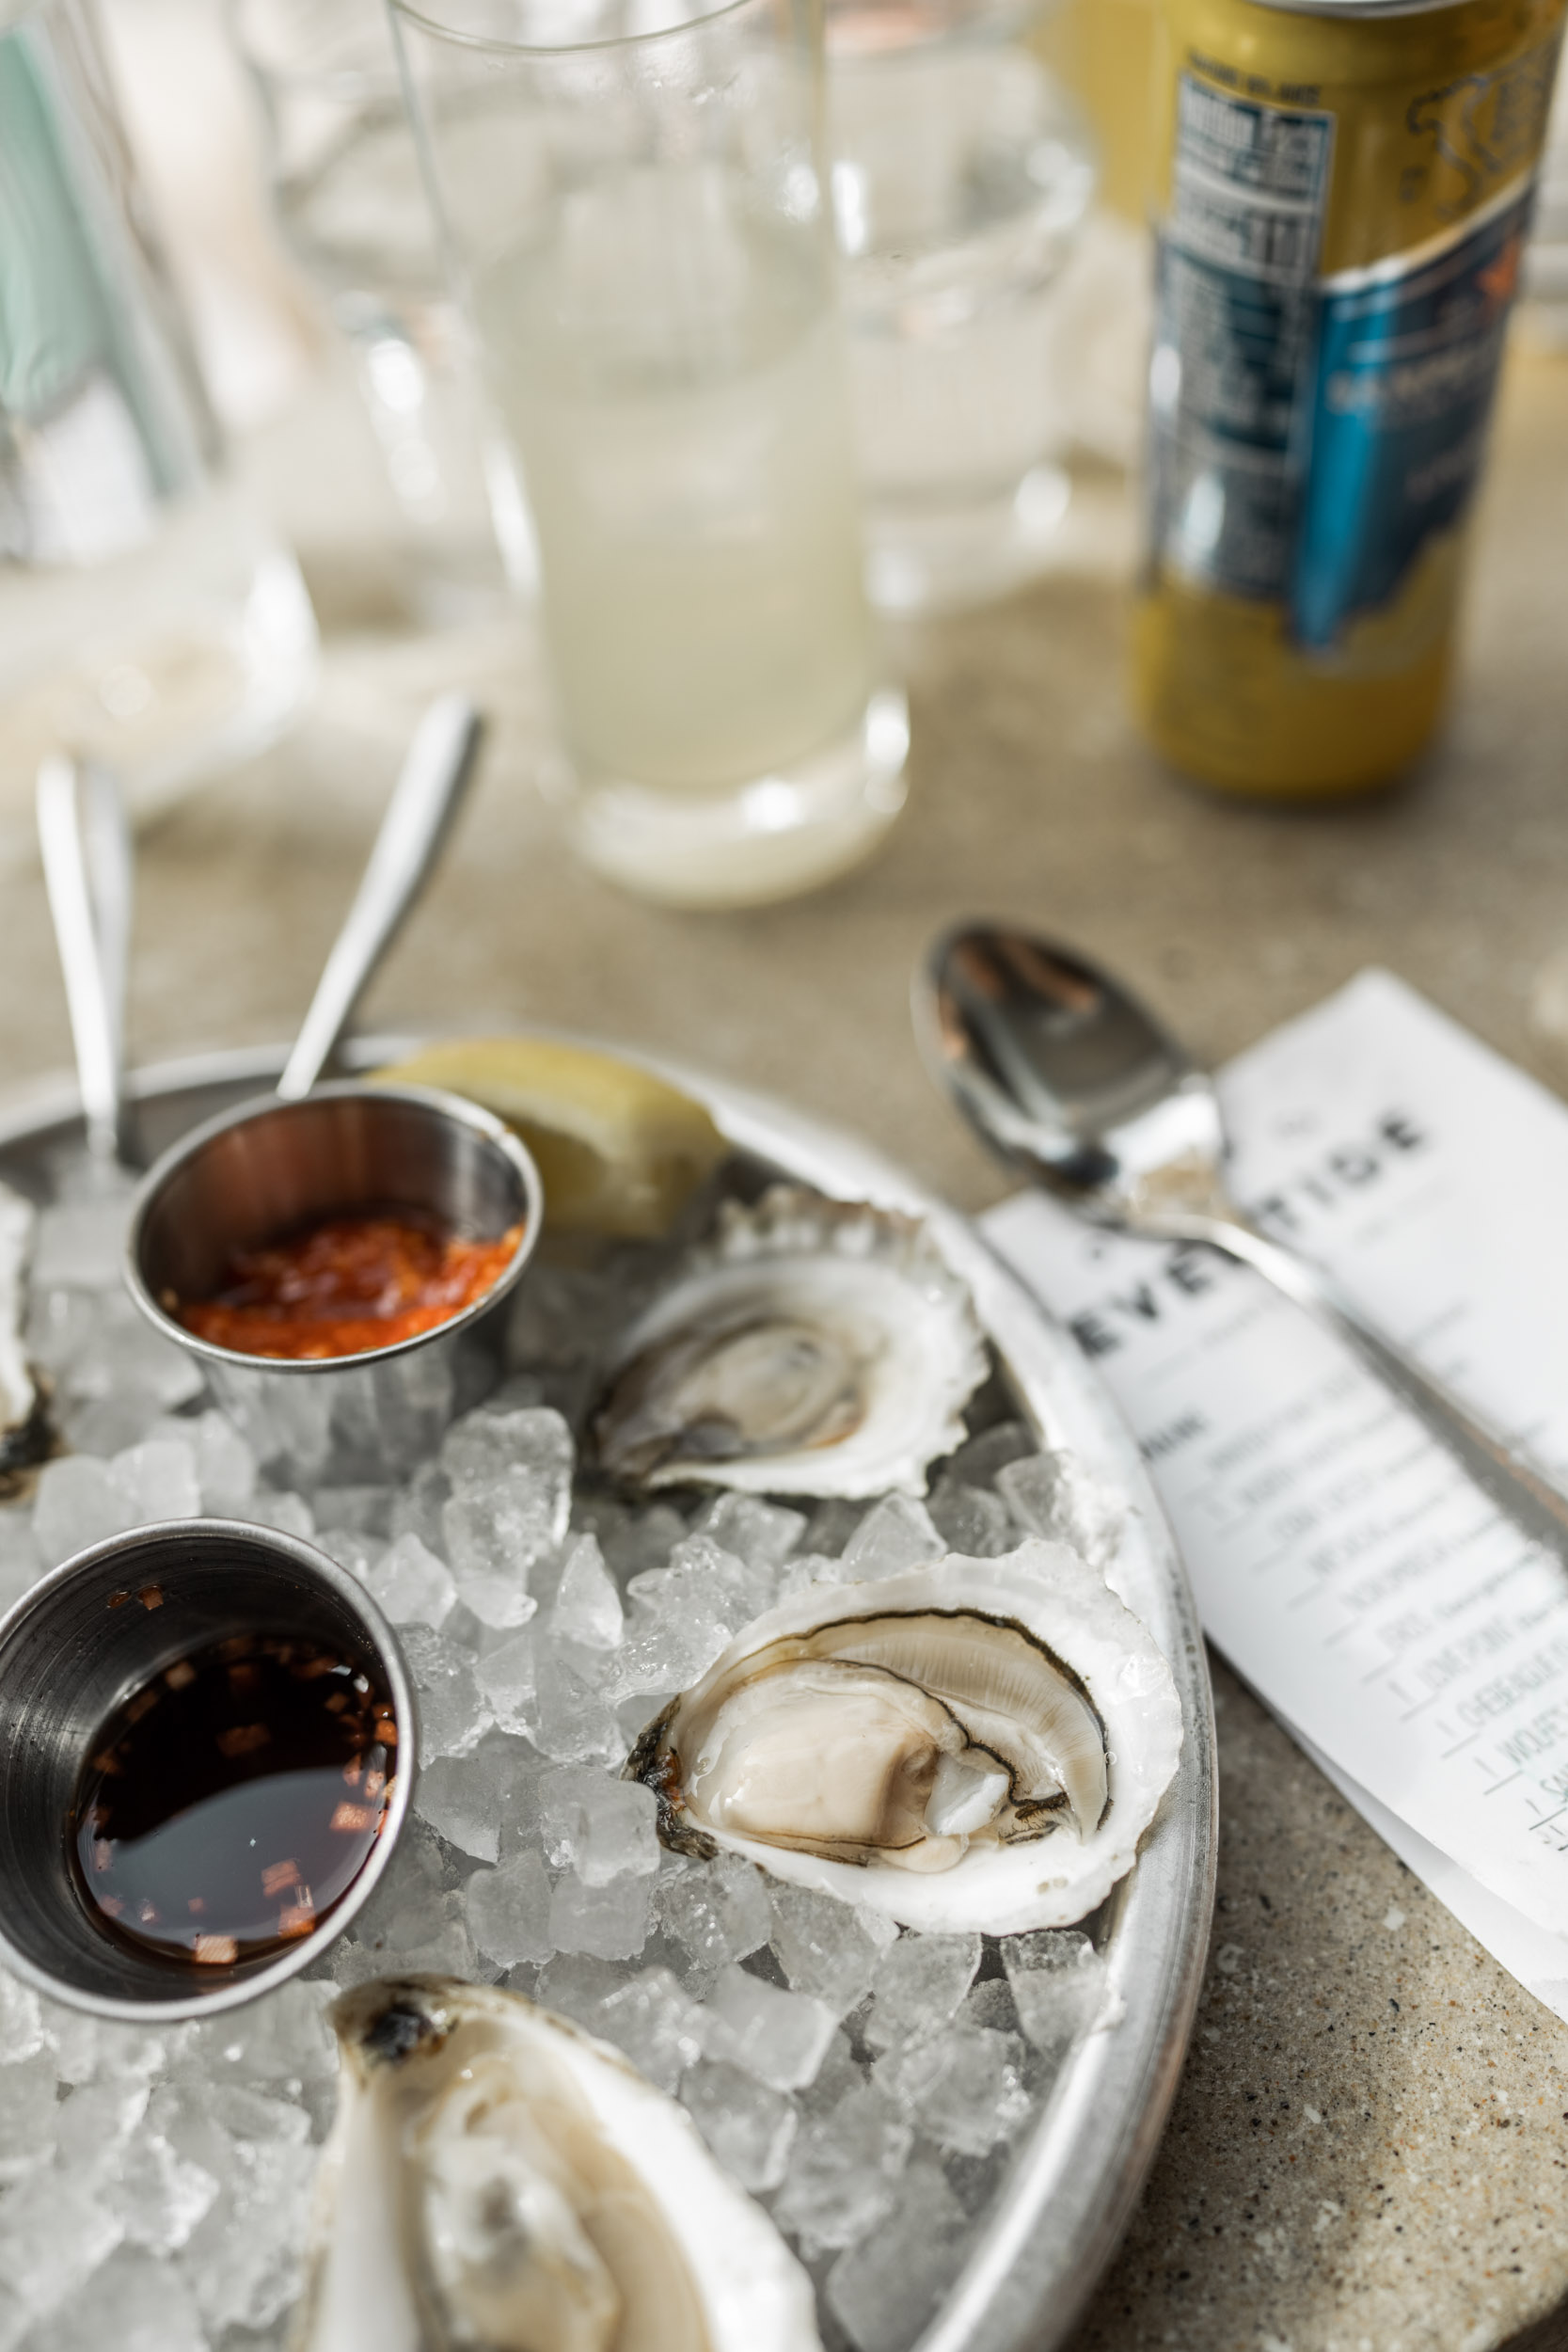 eventide oyster co portland maine an trieu style and senses travel guide